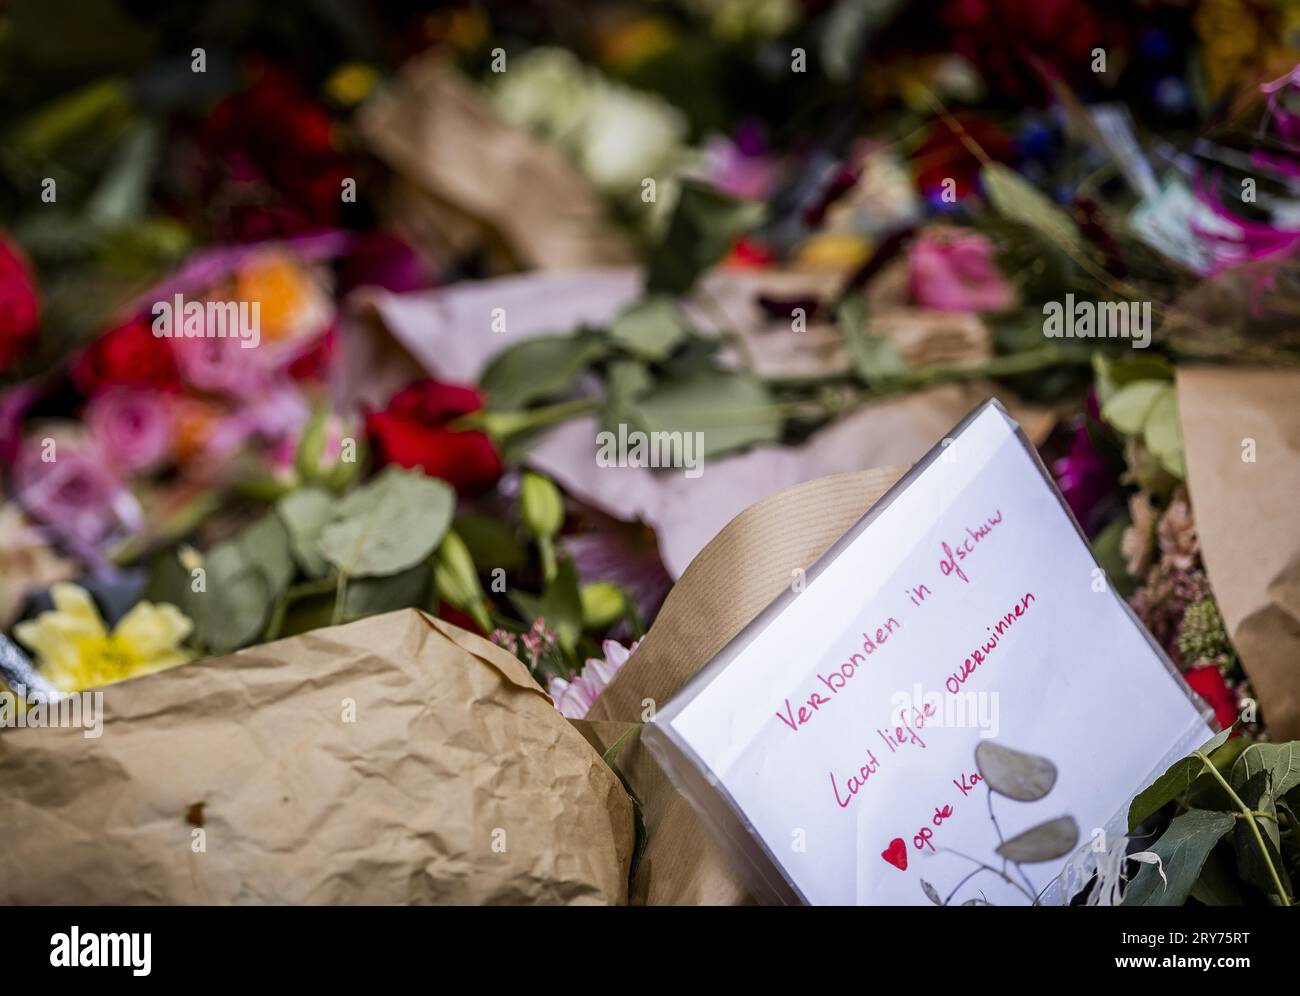 ROTTERDAM - Flowers and candles lie at a spontaneously erected monument near the health center where the 43-year-old general practitioner who was shot dead at the Erasmus MC worked. The man also worked as a teacher at Erasmus MC. ANP REMKO DE WAAL netherlands out - belgium out Stock Photo